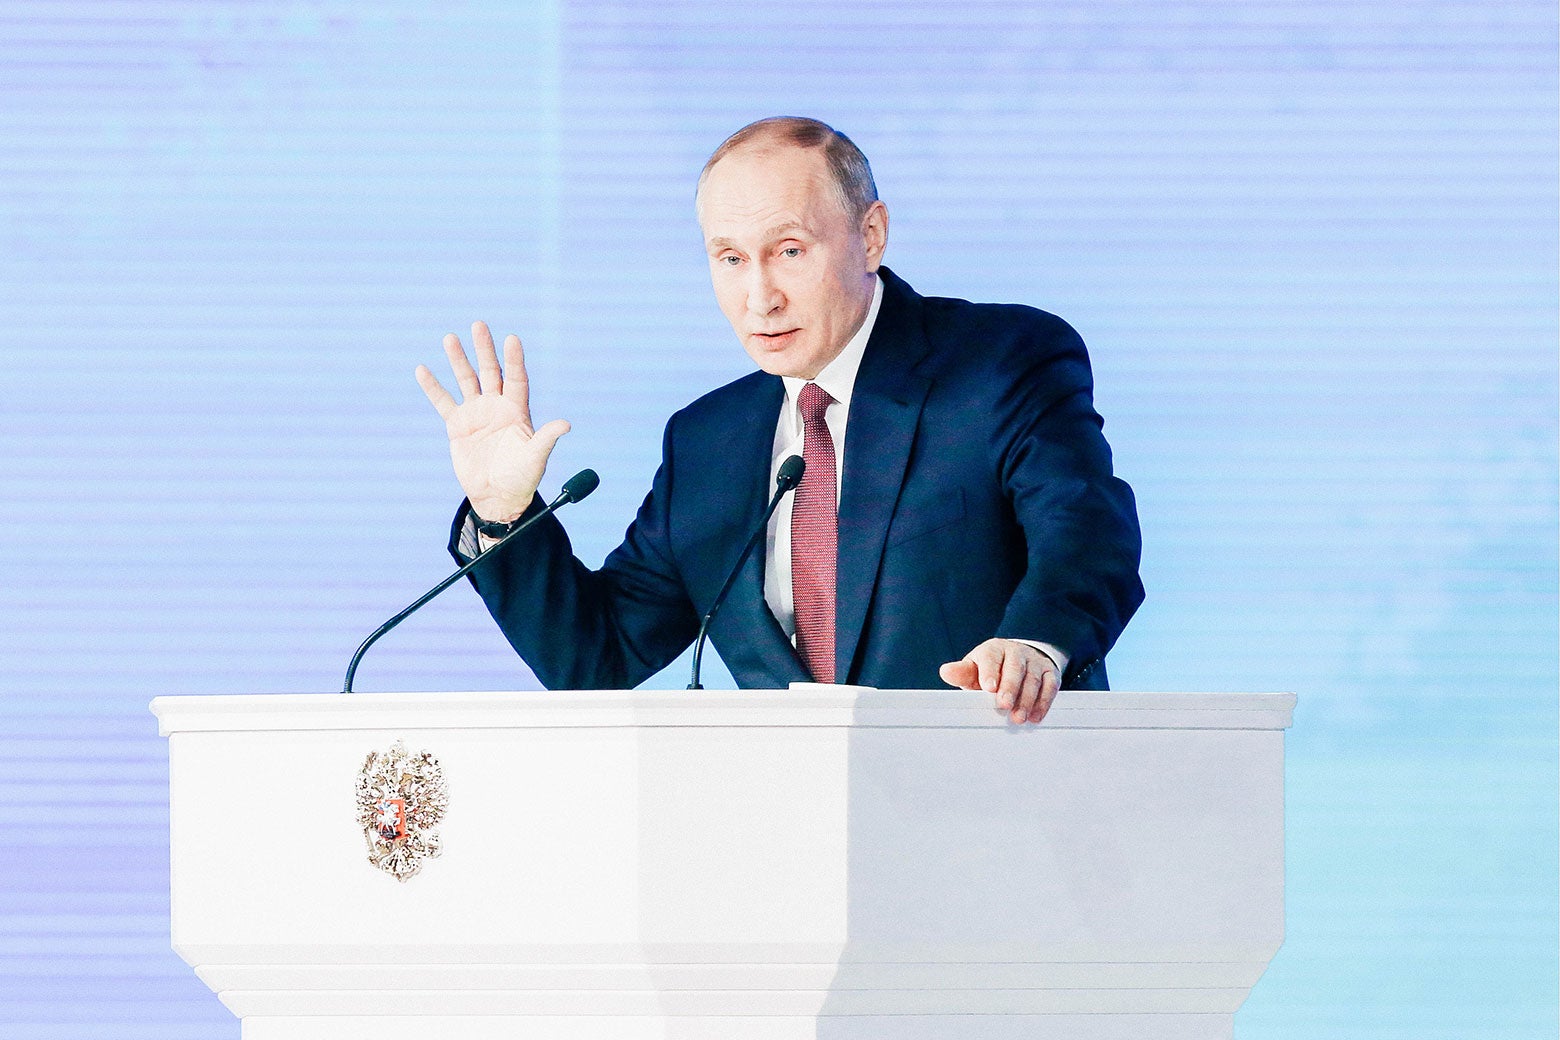 Russia’s President Vladimir Putin delivers an annual address to the Federal Assembly of the Russian Federation on Thursday in Moscow.